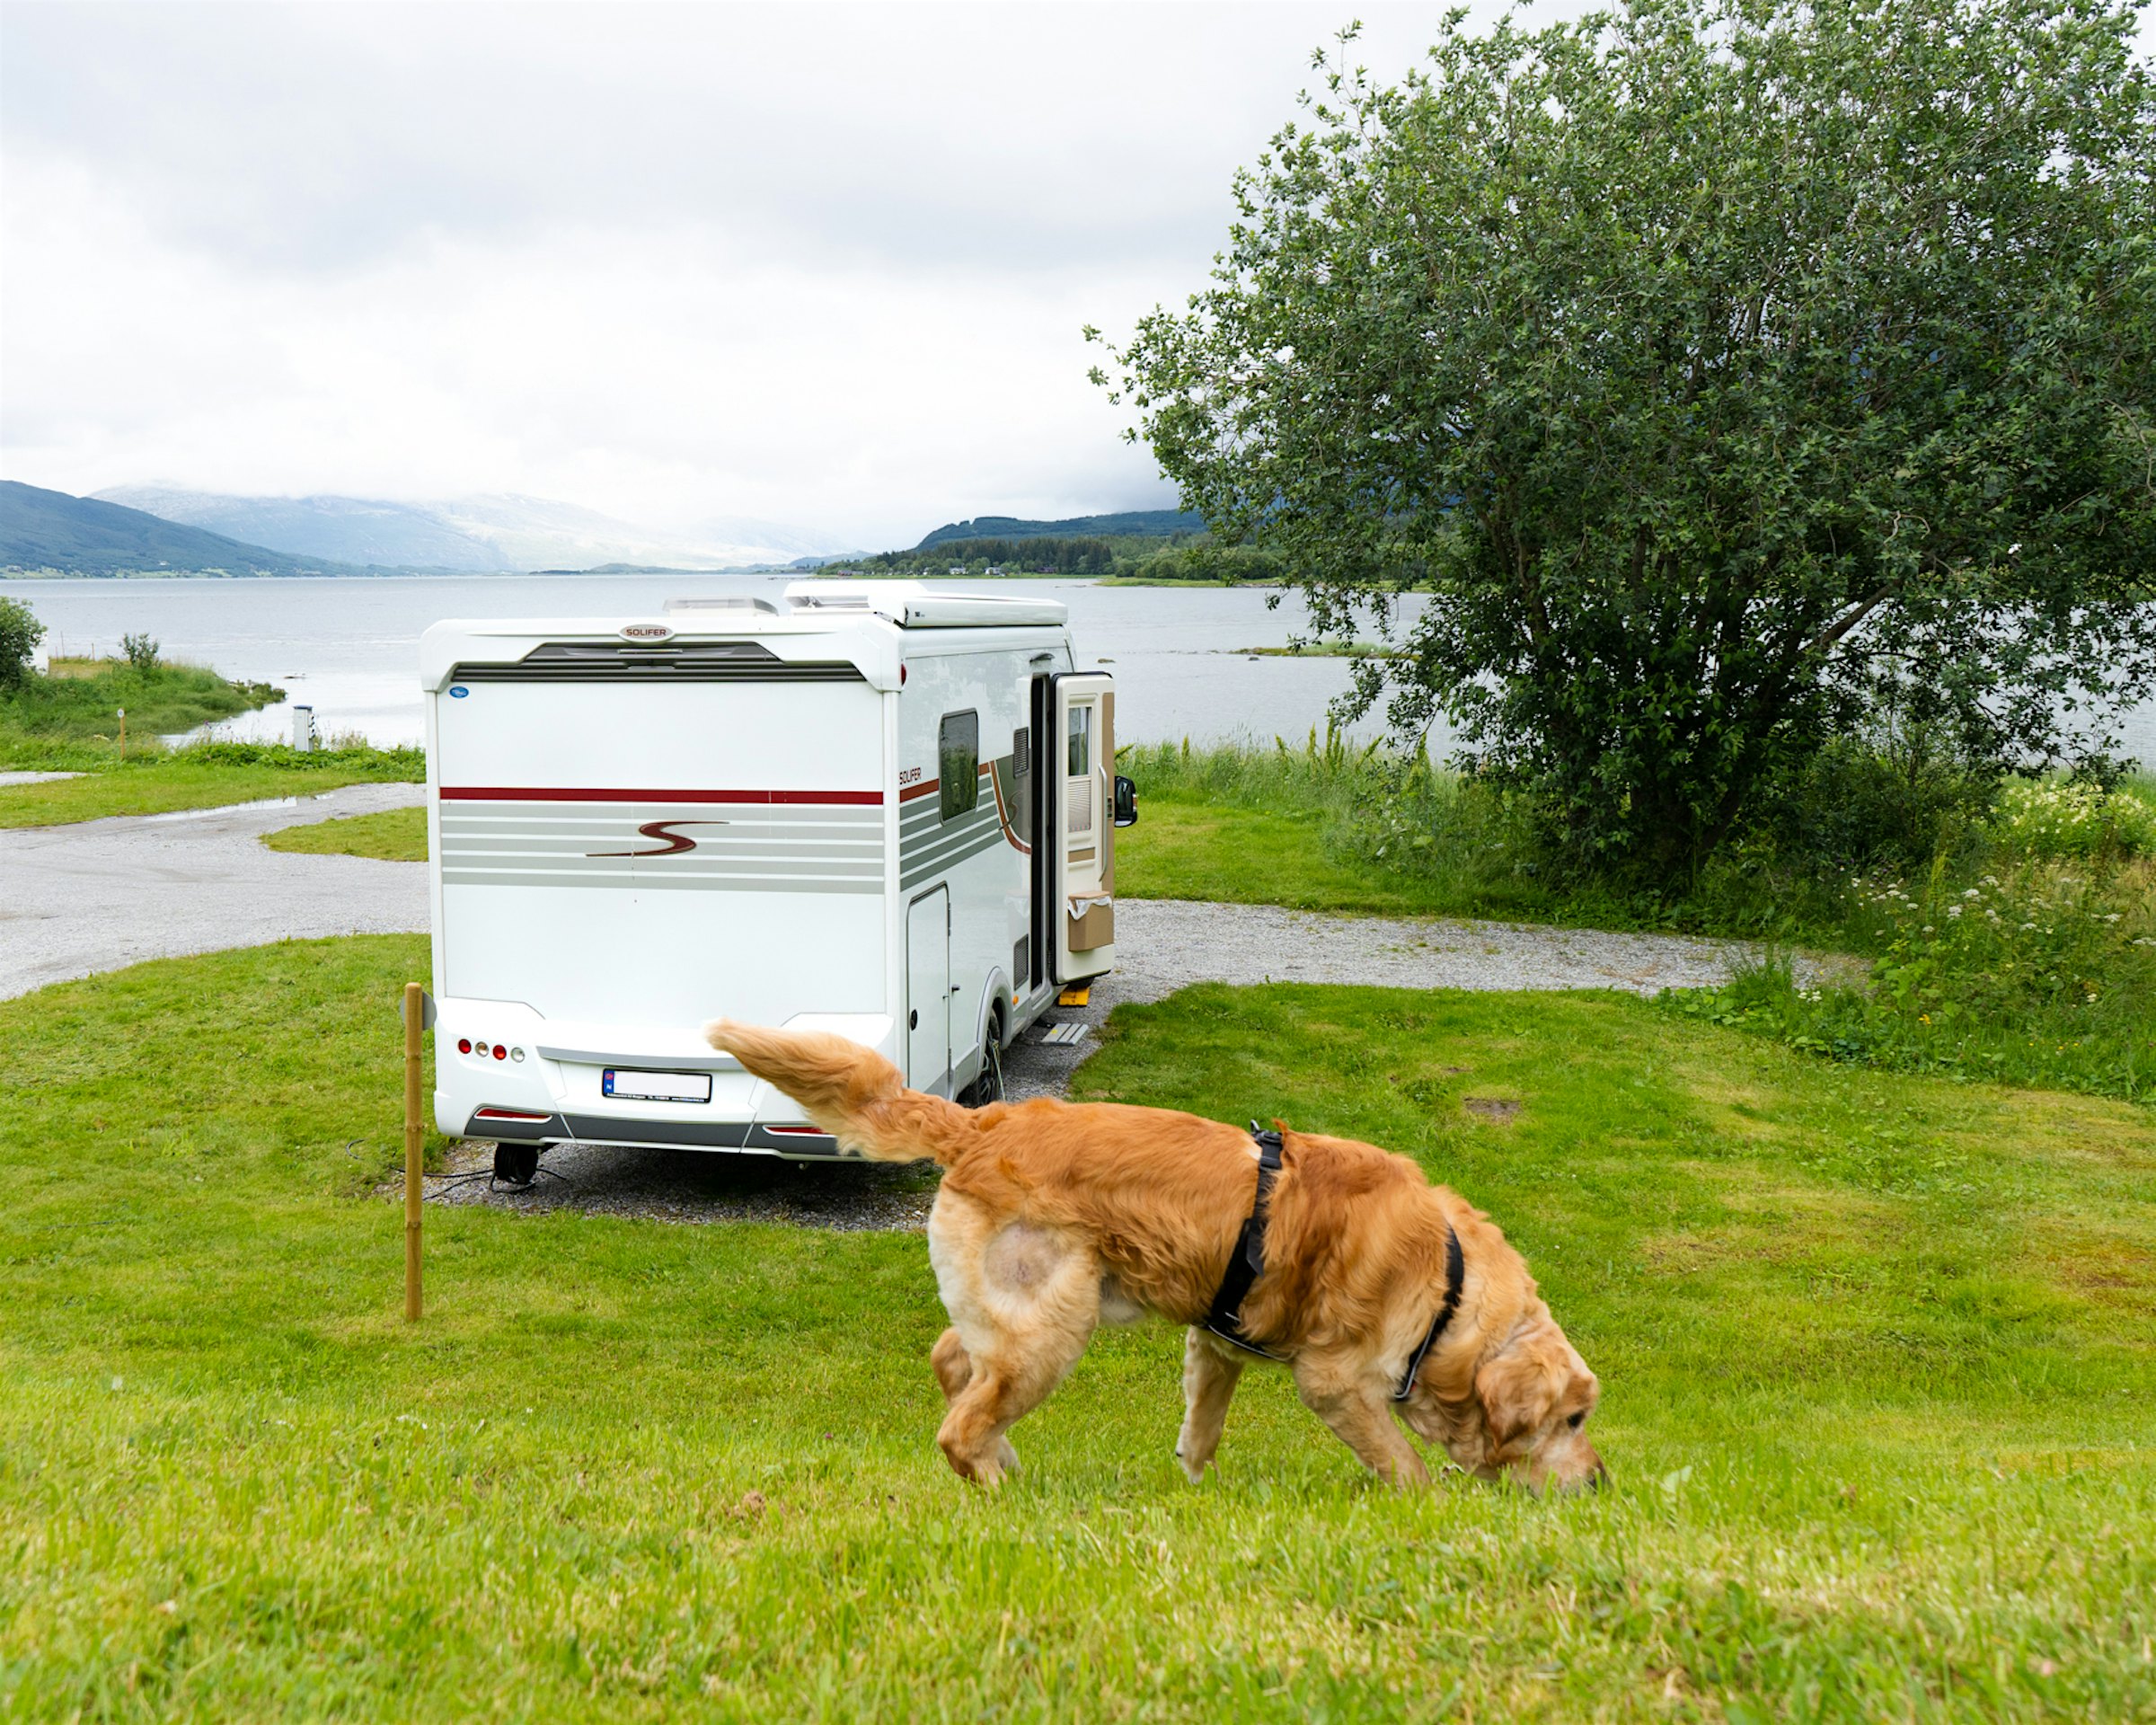 Dog sniffs the grass in front of the mobile home with a view of the mountains and water behind. Photo